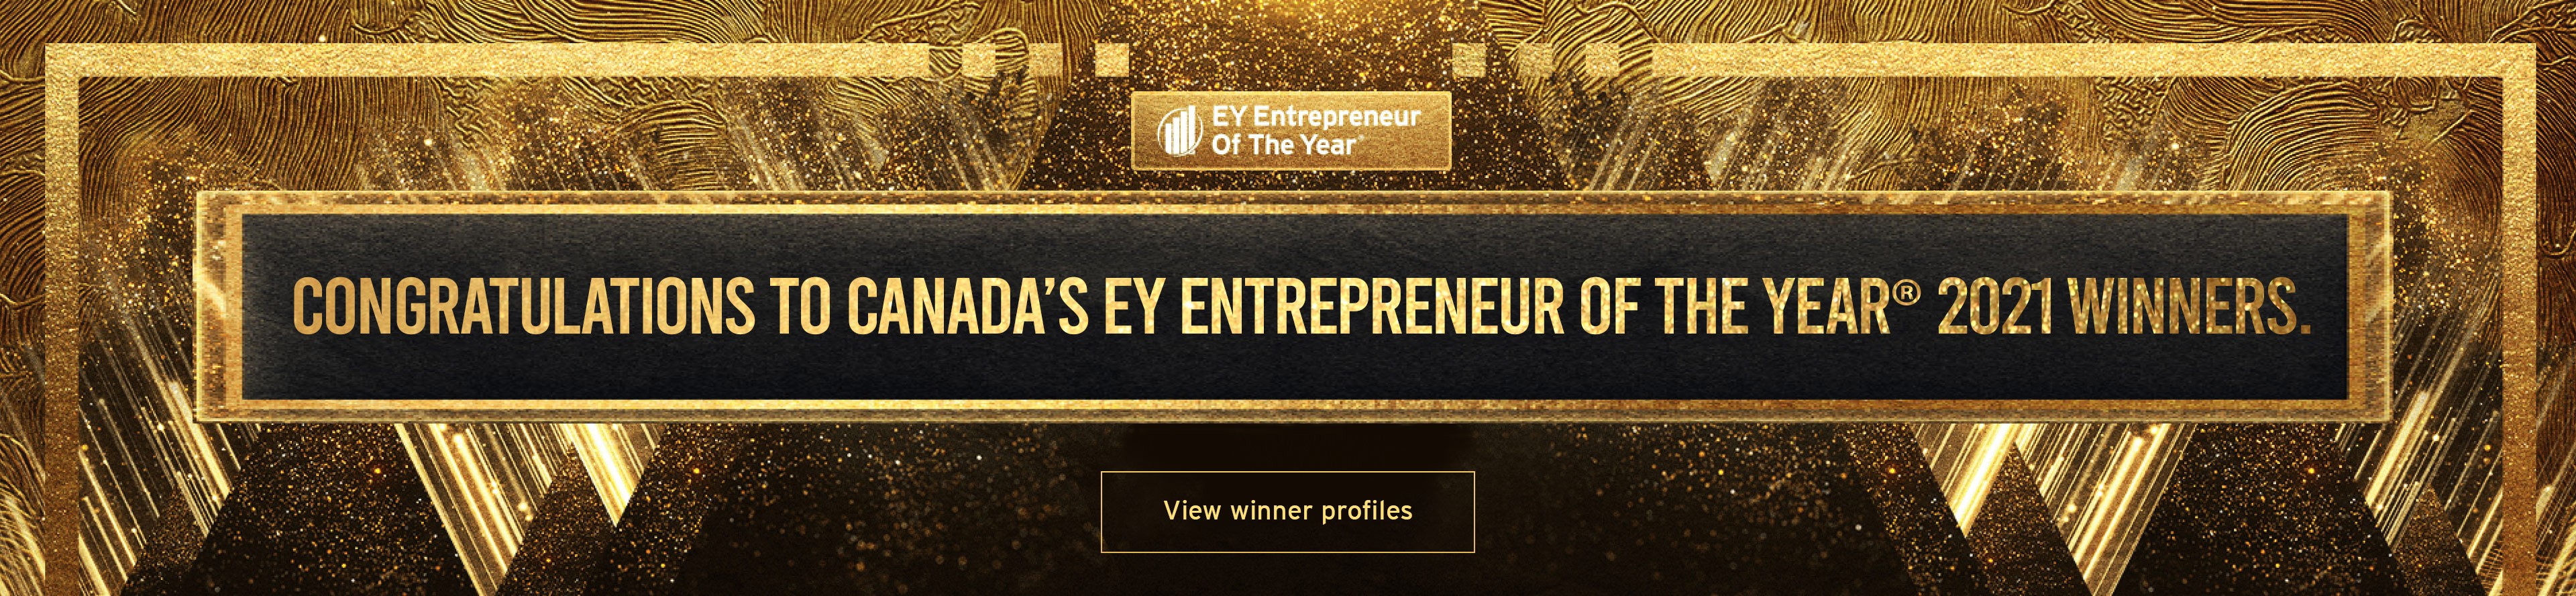 Congratulations to Canada's EY Entrepreneur of the Year® 2021 winners